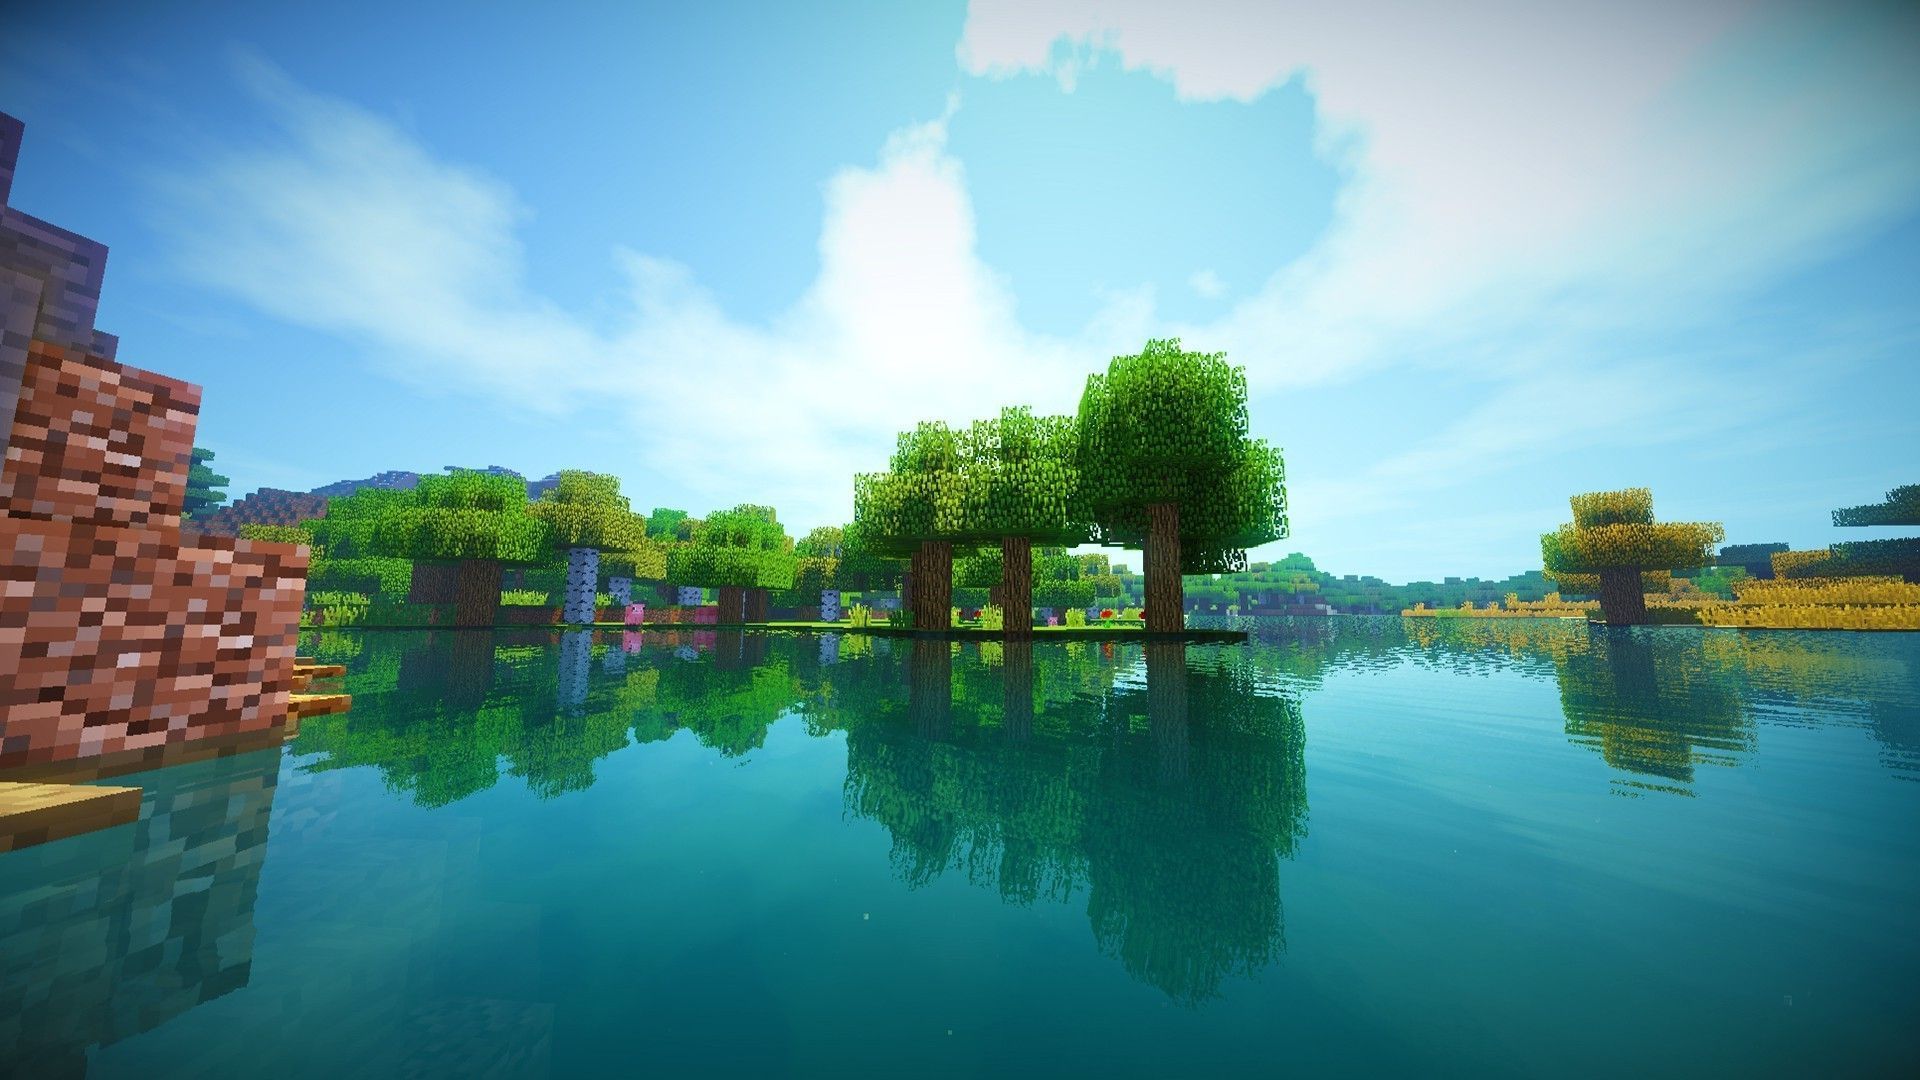 A pixelated image of trees and water - Minecraft